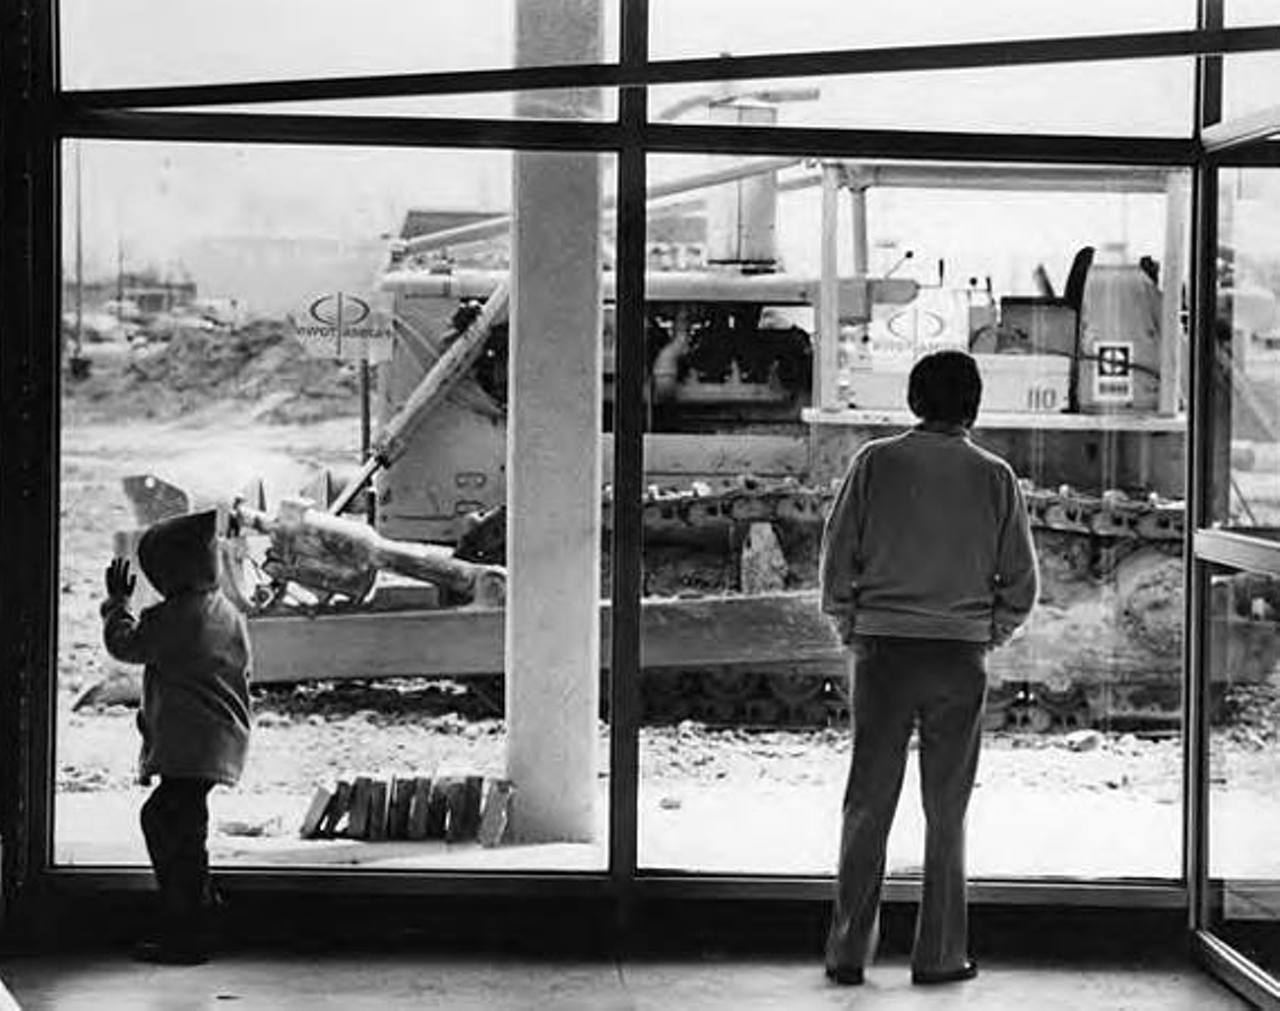 Patrons watch construction outside of Parmatown mall.